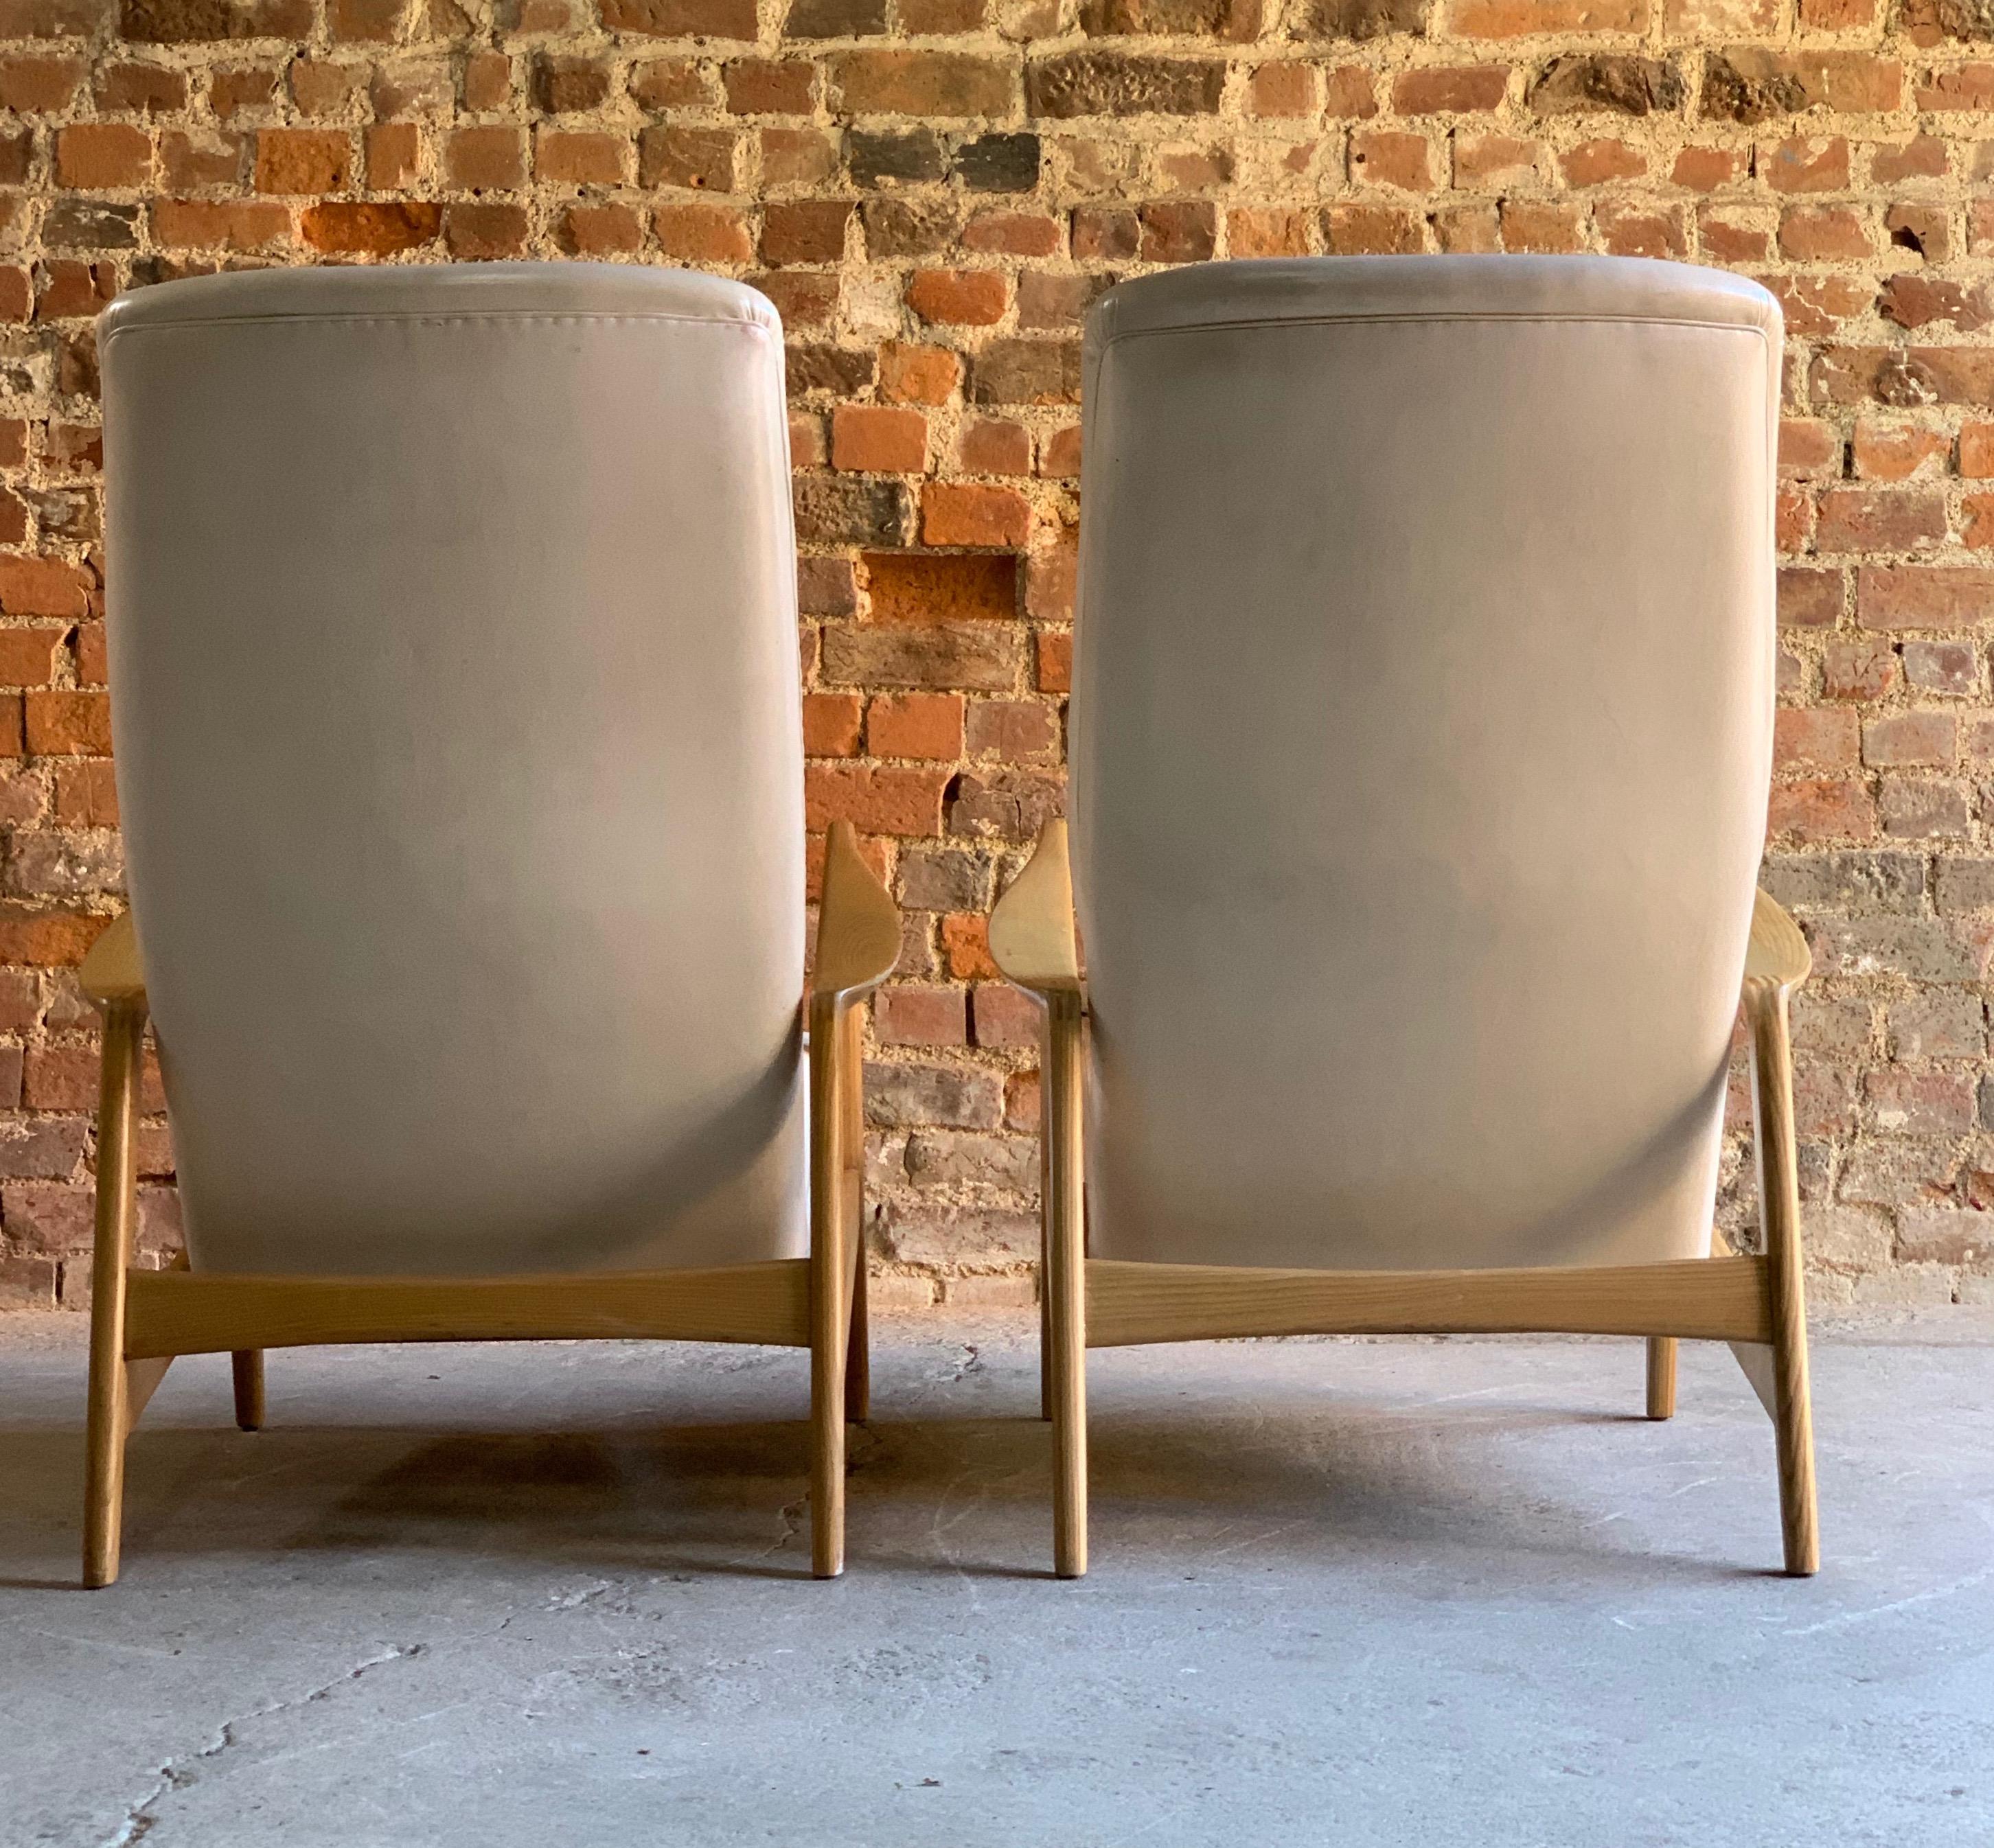 Mid-Century Modern Gio Ponti Pair of Ash Lounge Chairs by Cassina, Italy, circa 1958